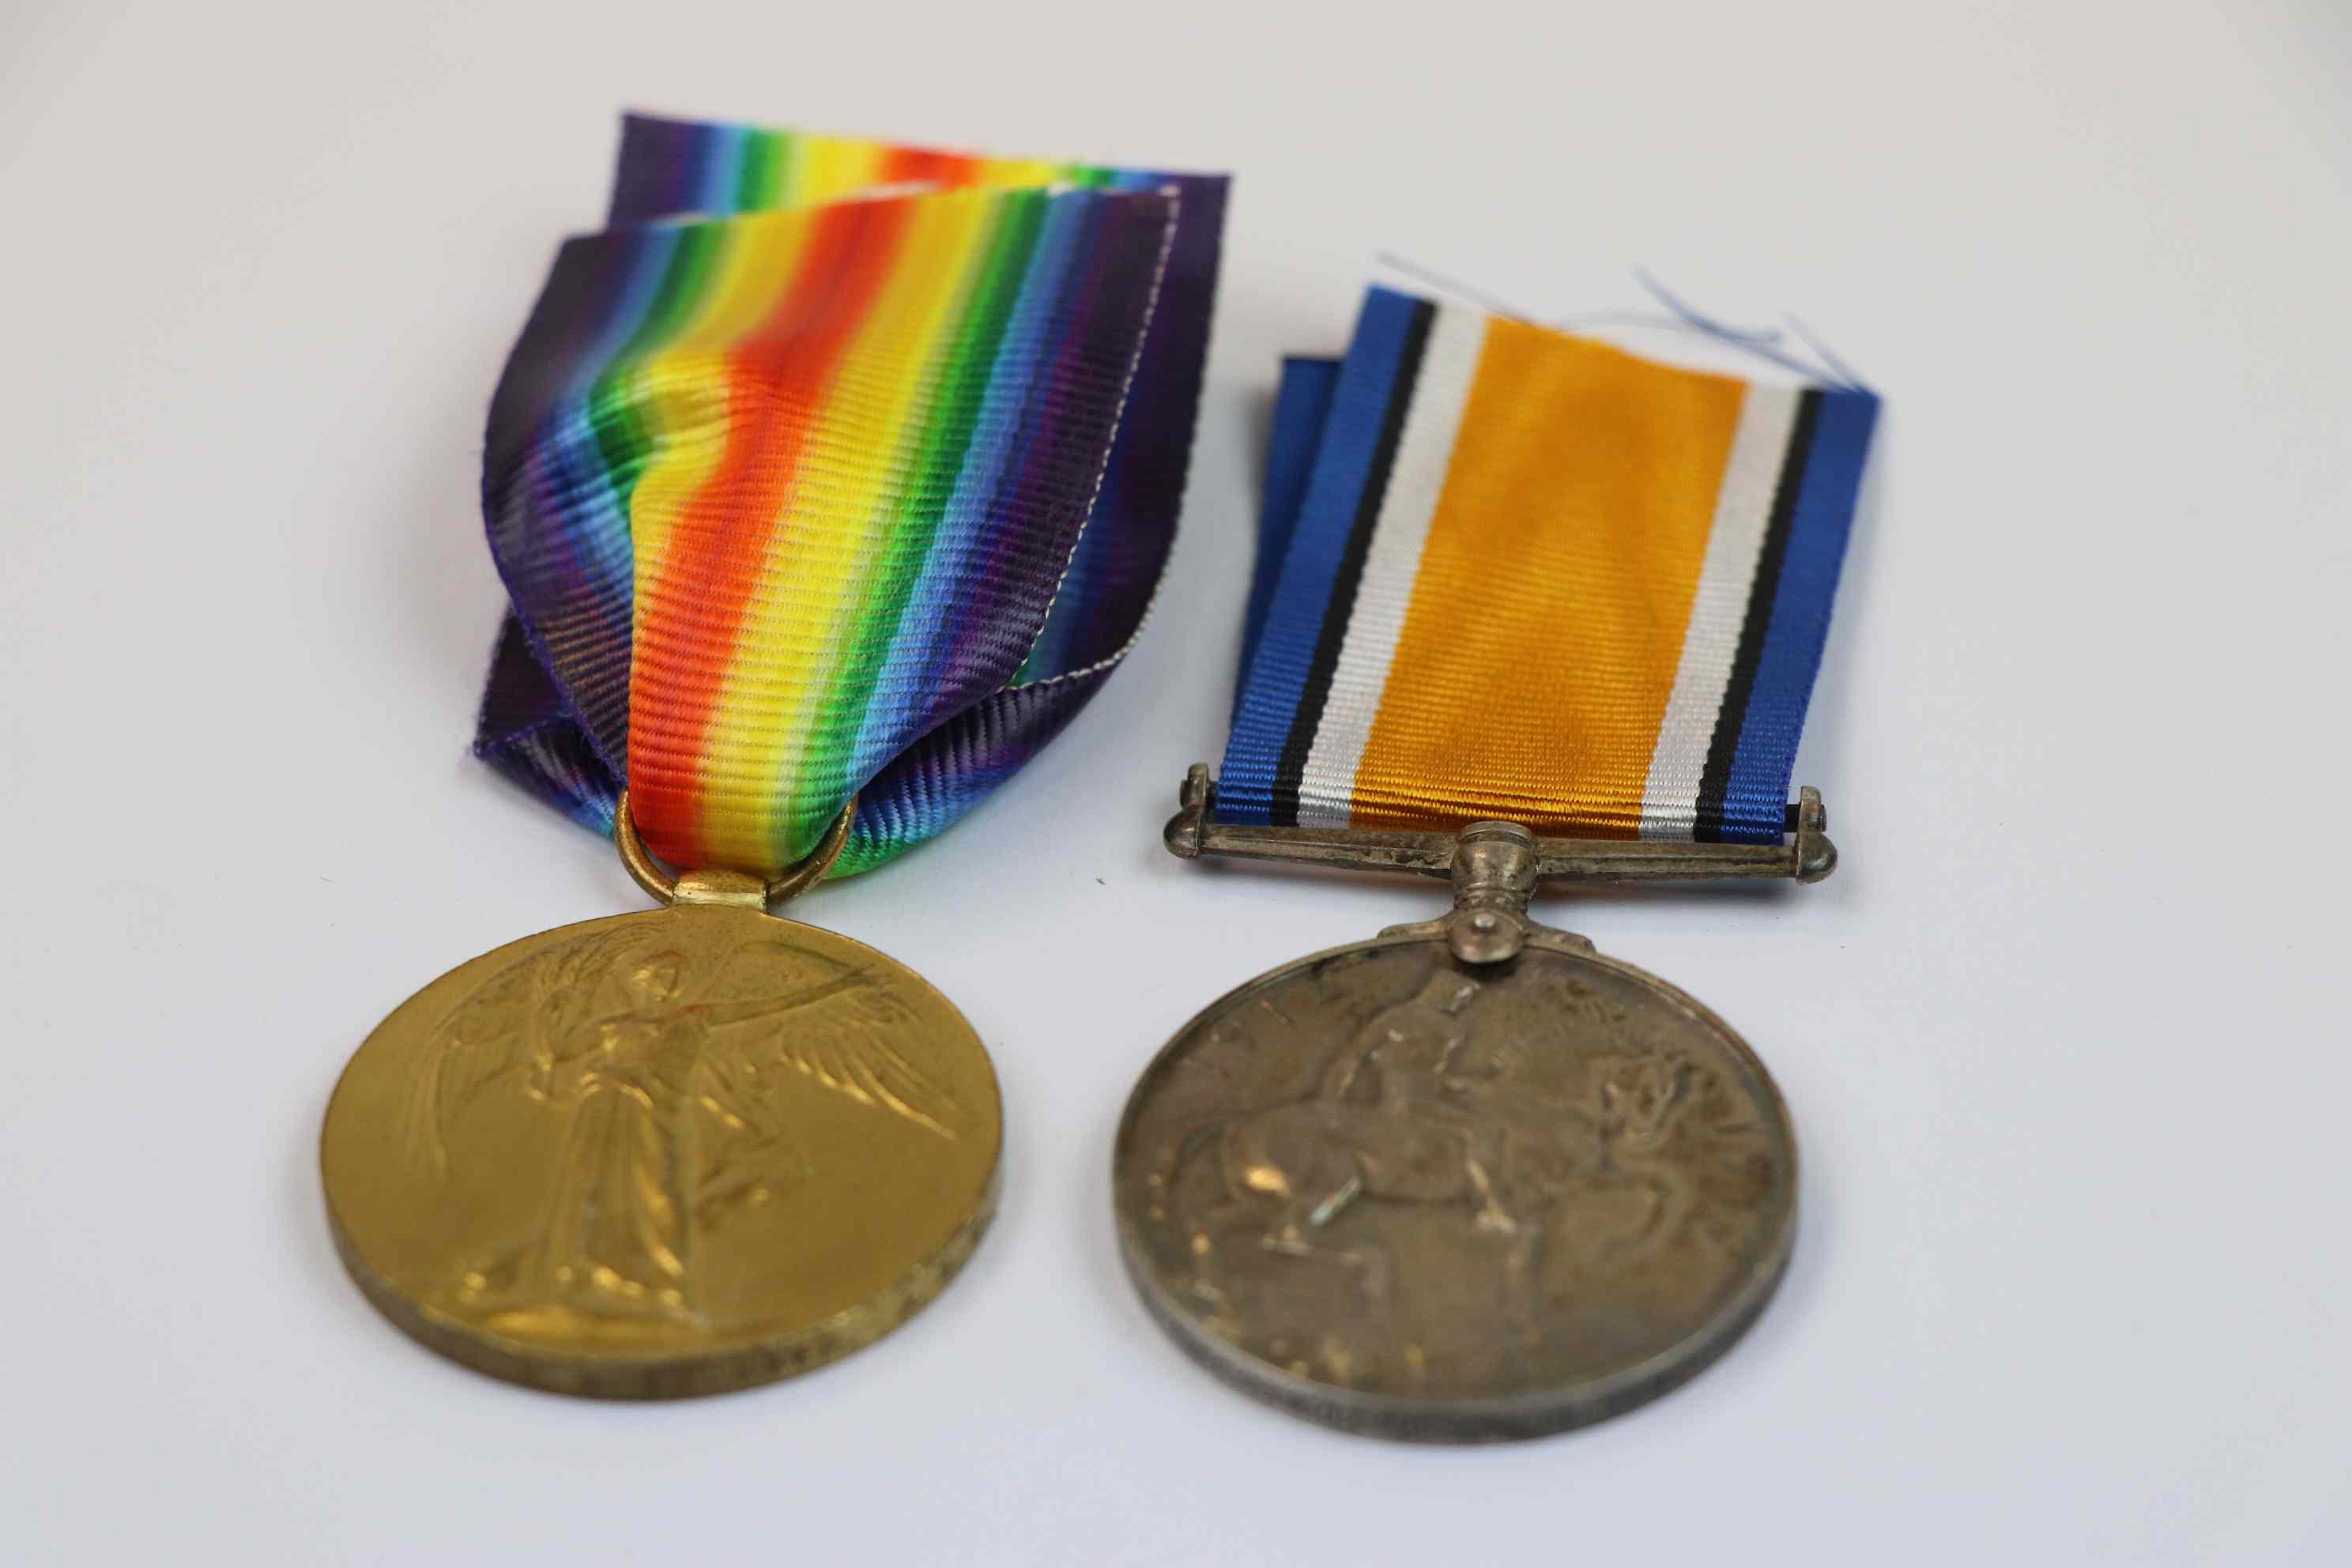 A Full Size World War One / WW1 Medal Pair To Include The Victory Medal And The British War Medal - Image 3 of 8